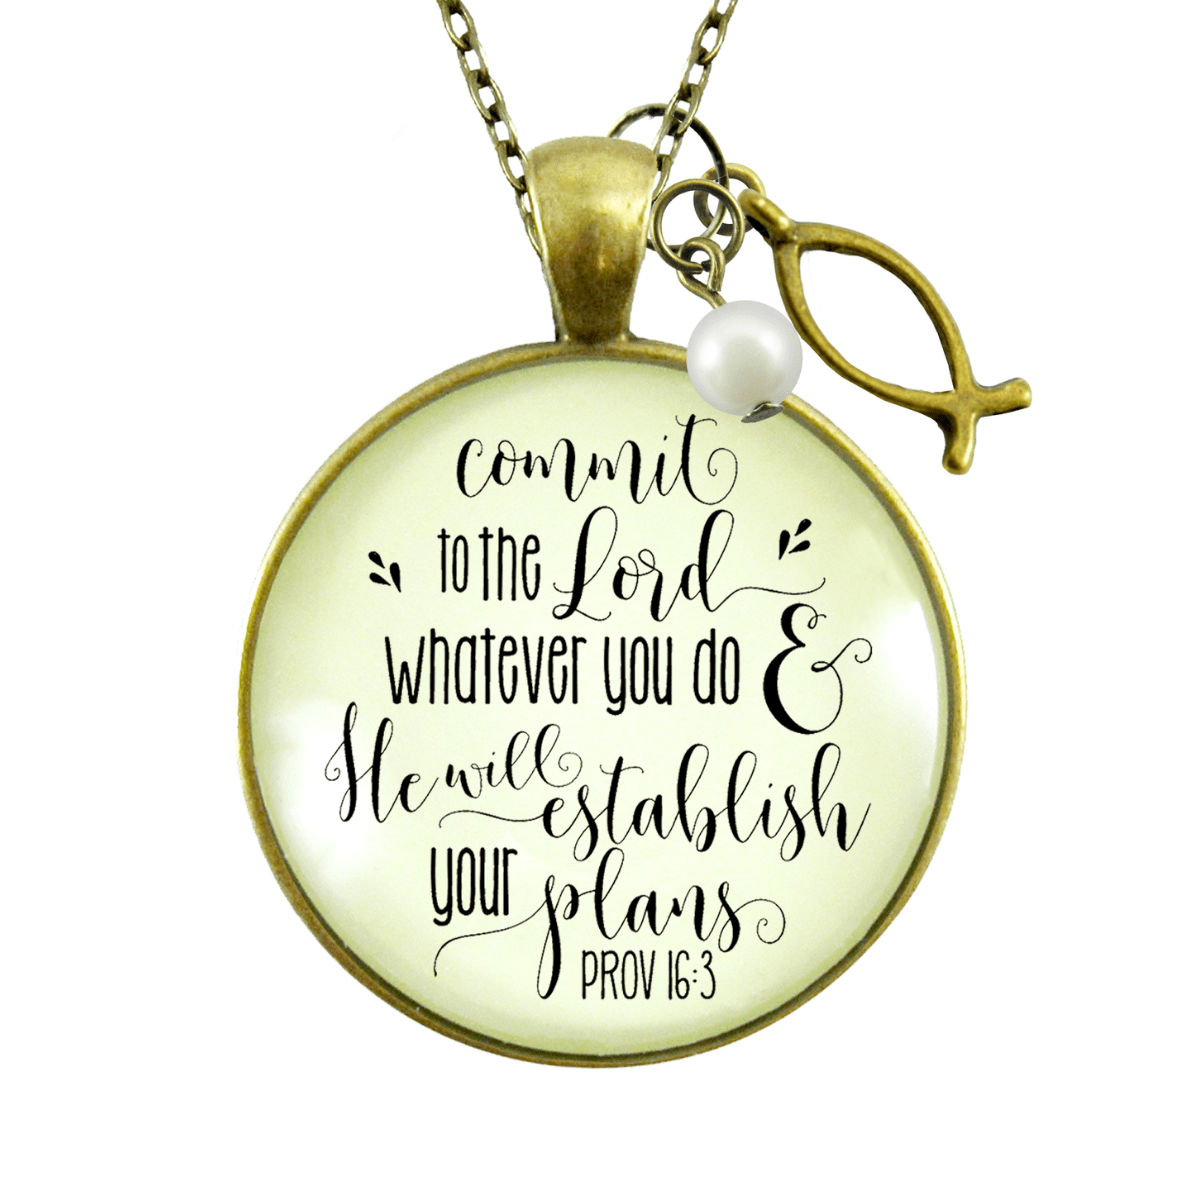 Gutsy Goodness Jesus Fish Necklace Commit to the Lord Proverbs Jewelry Ichthys Charm - Gutsy Goodness Handmade Jewelry;Jesus Fish Necklace Commit To The Lord Proverbs Jewelry Ichthys Charm - Gutsy Goodness Handmade Jewelry Gifts